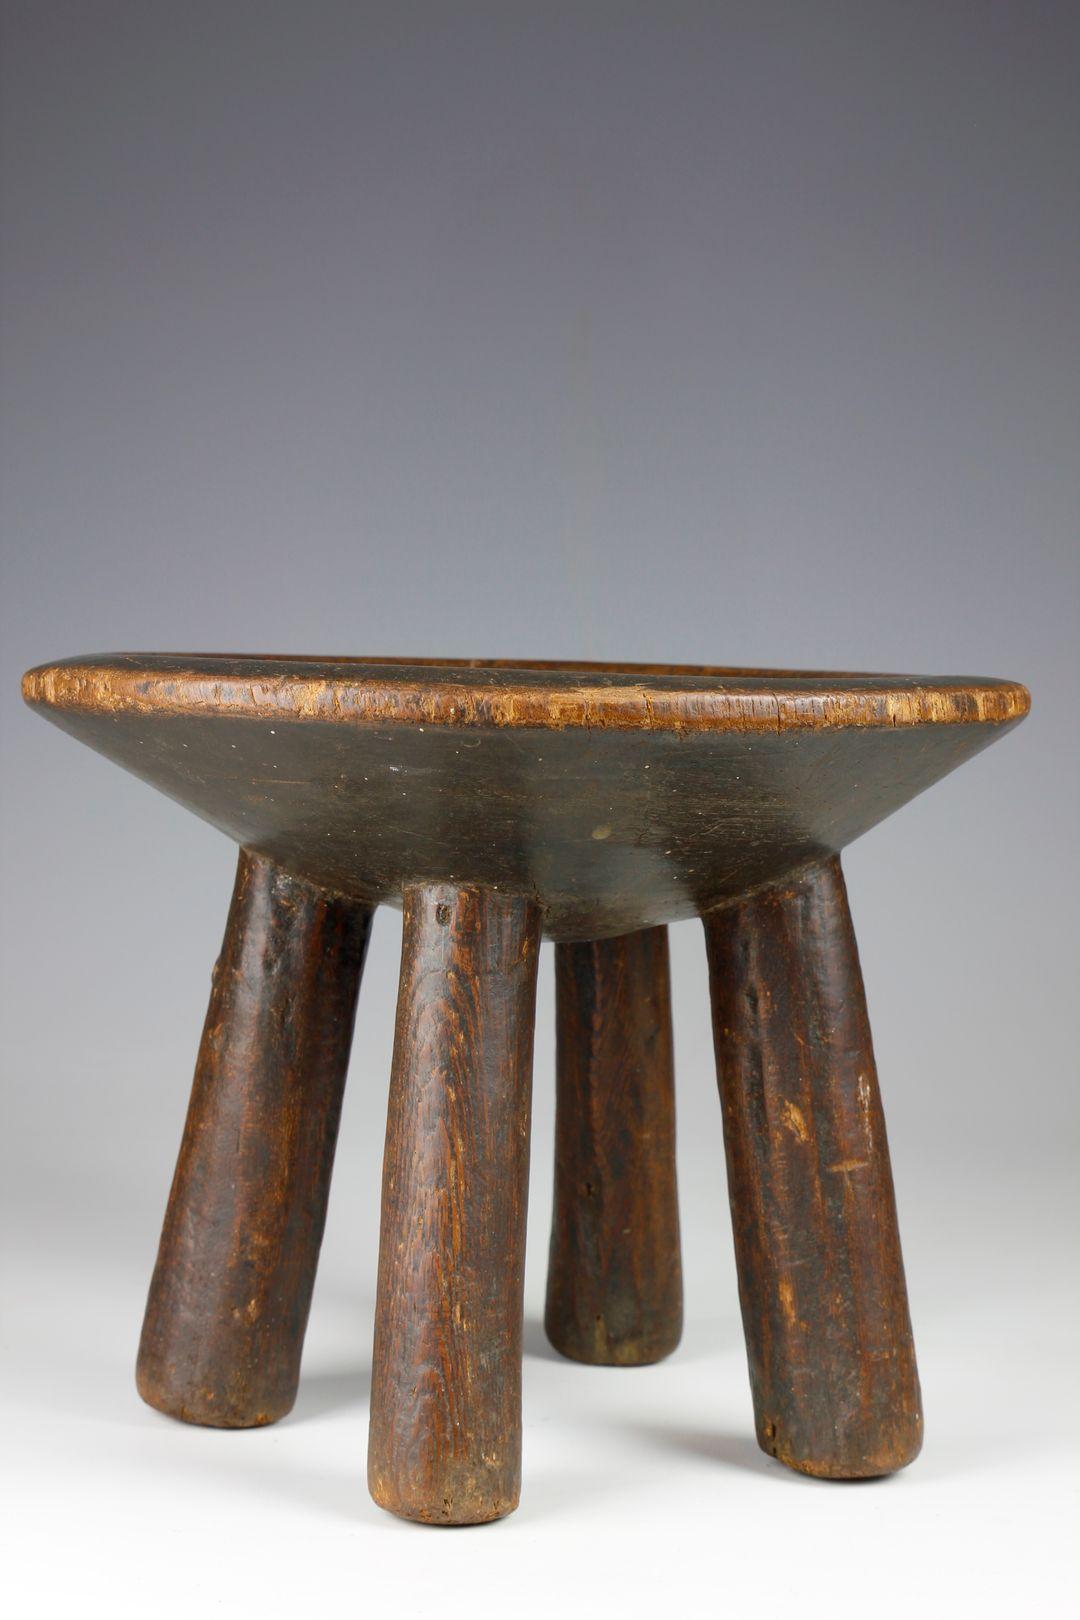 The form of this finely carved early twentieth-century village stool, from the Hehe culture in Tanzania, consists of four short, upright legs supporting a dish-shaped seat. A small decorative metal stud adorns one of the legs and over time, the